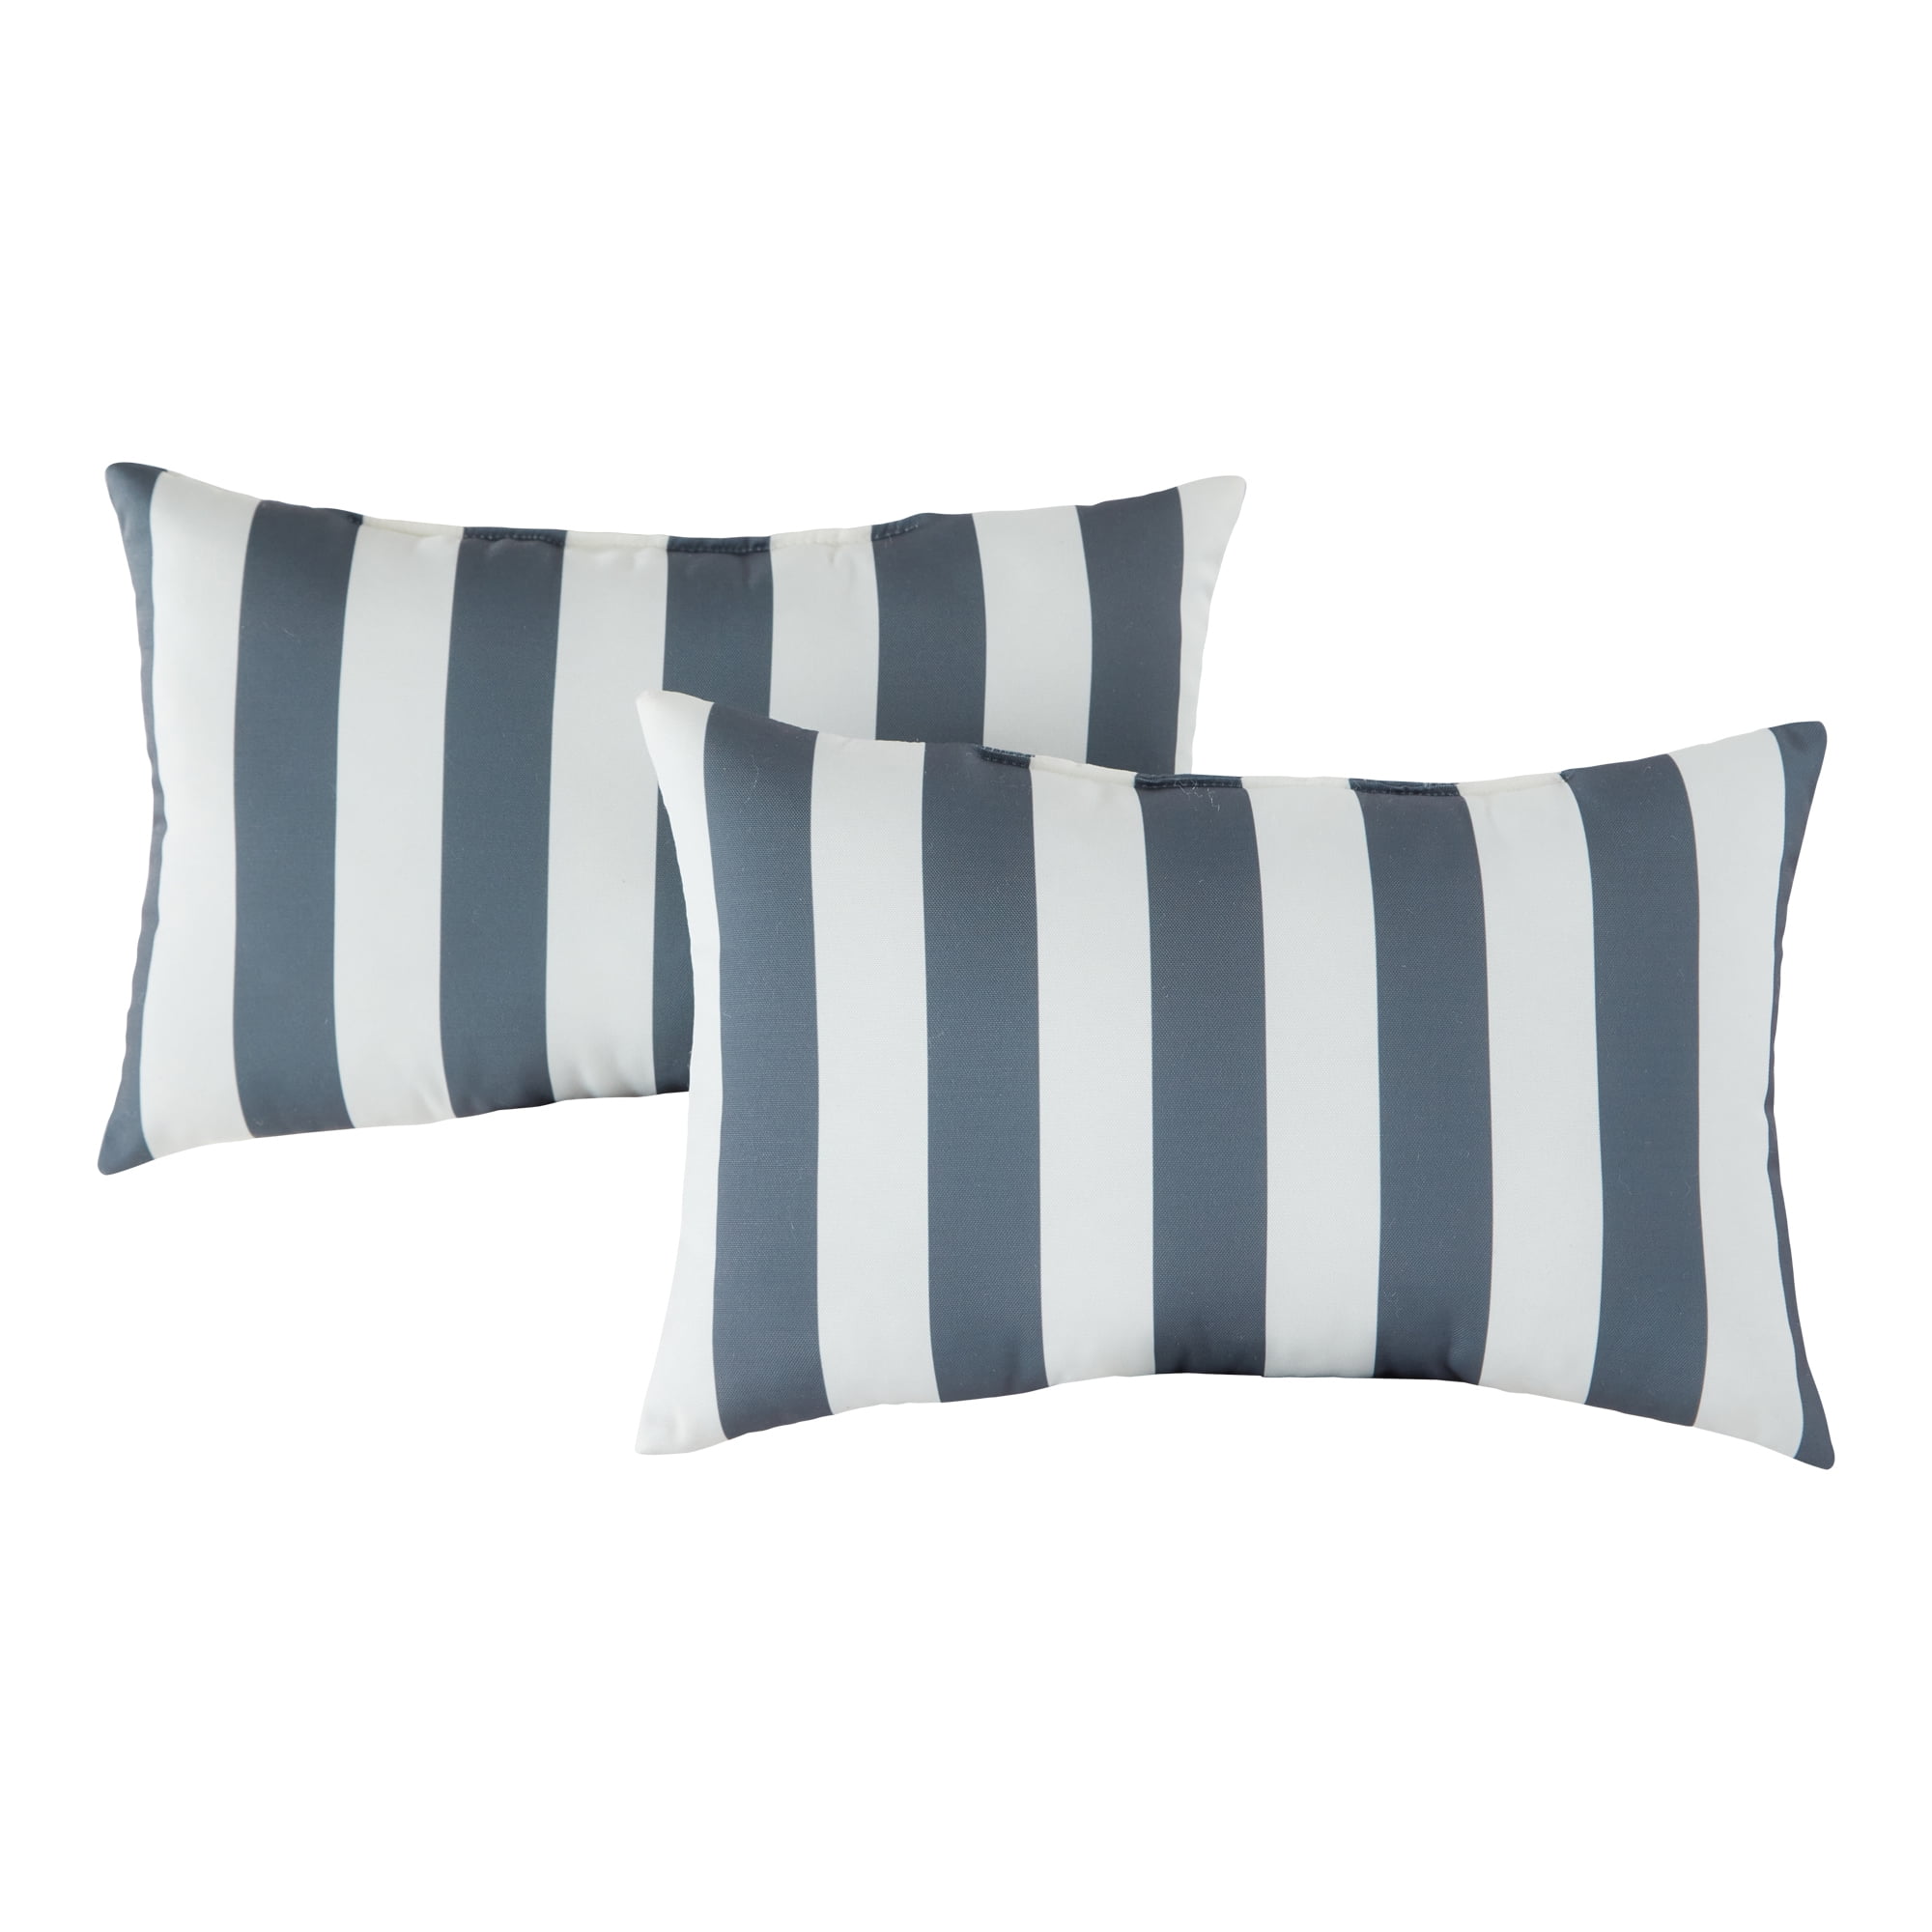 Set of 2 Olive Stripe 17-inch Indoor/Outdoor Throw Pillow Green Striped Modern Contemporary Polyester Reversible Uv Resistant Water